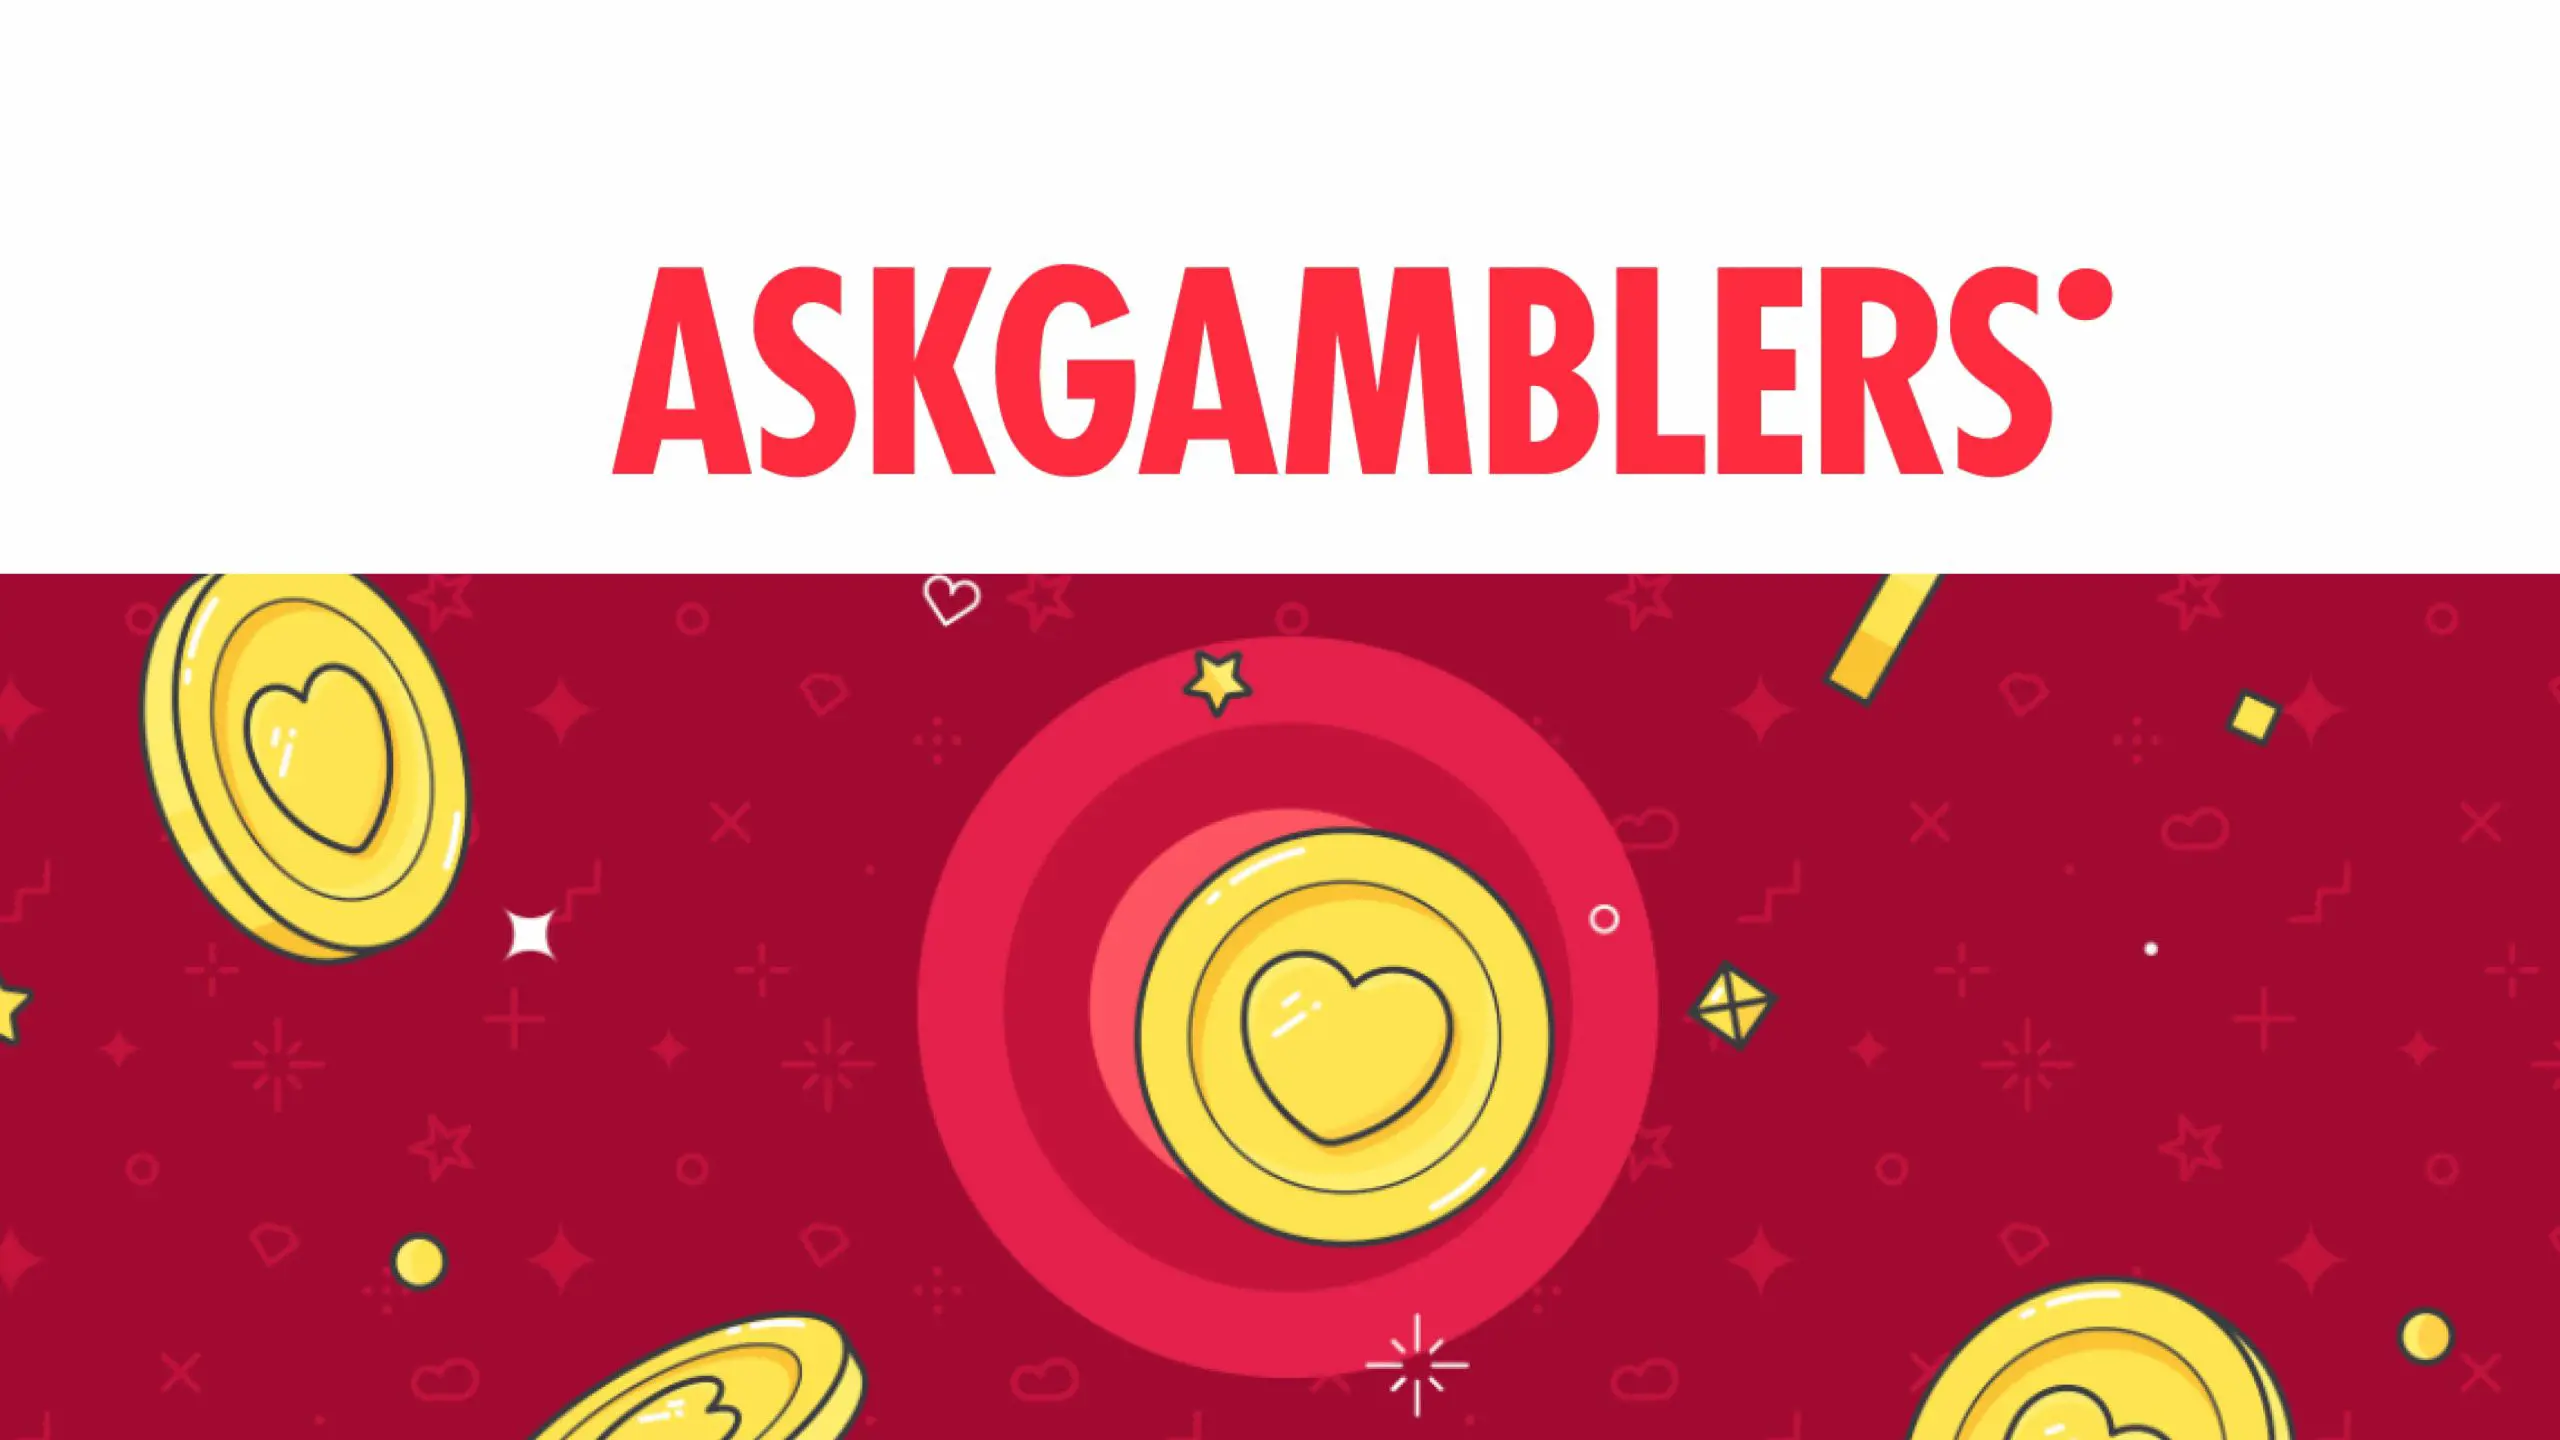 AskGamblers_charity-month-image-1-scaled